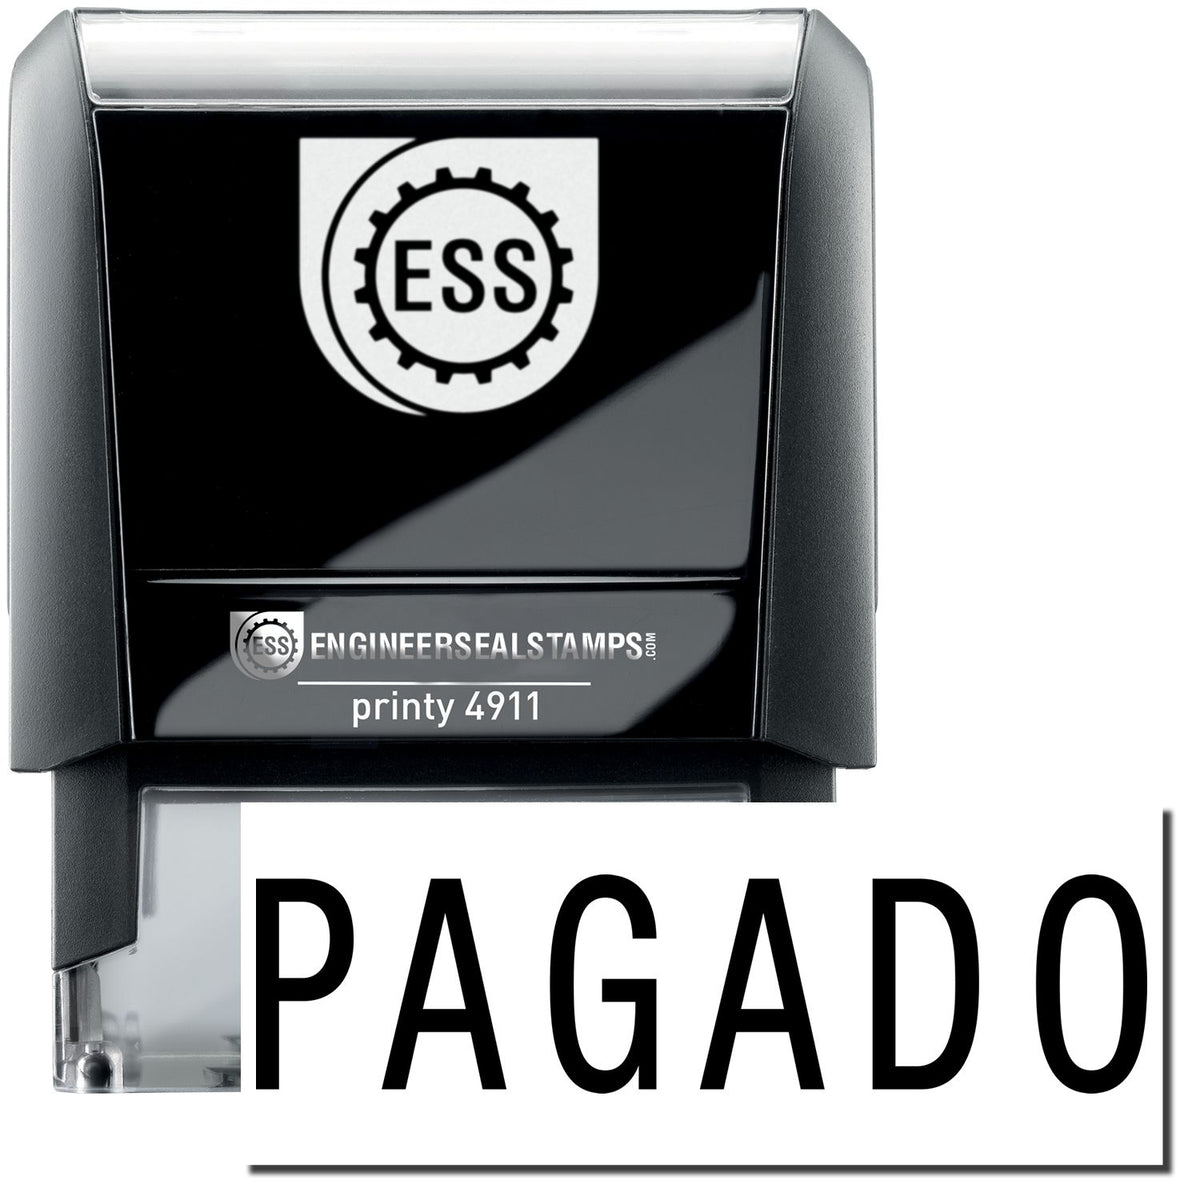 A self-inking stamp with a stamped image showing how the text &quot;PAGADO&quot; is displayed after stamping.